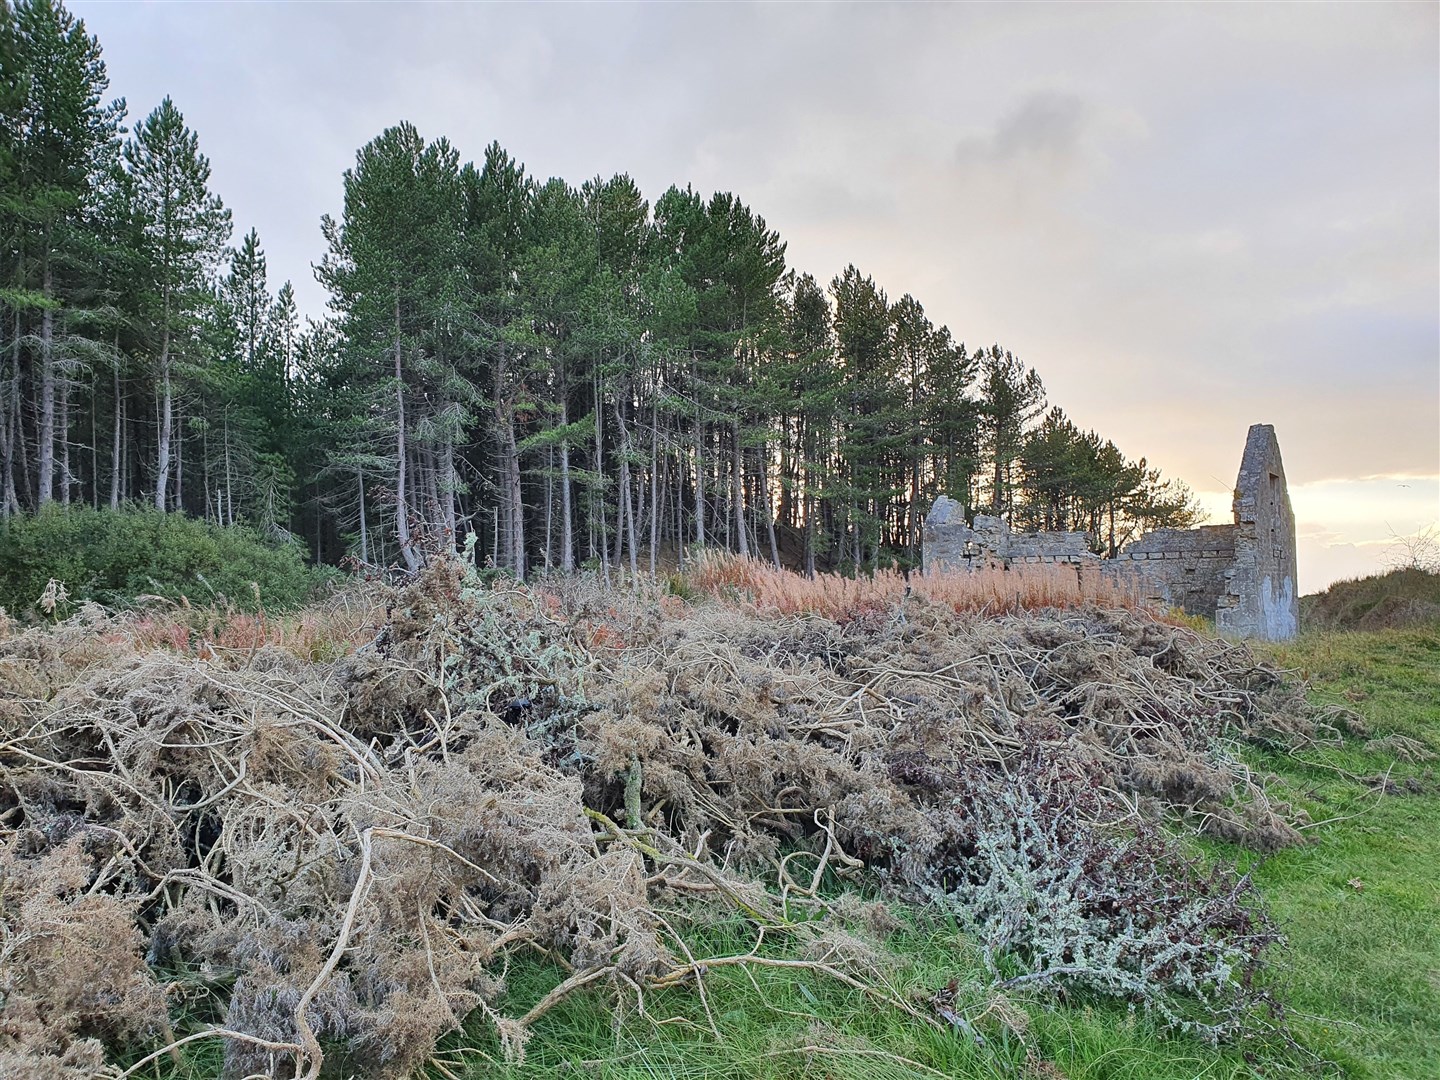 Campaigners say large quantities of weedkiller has been used to clear gorse bushes for a new path.